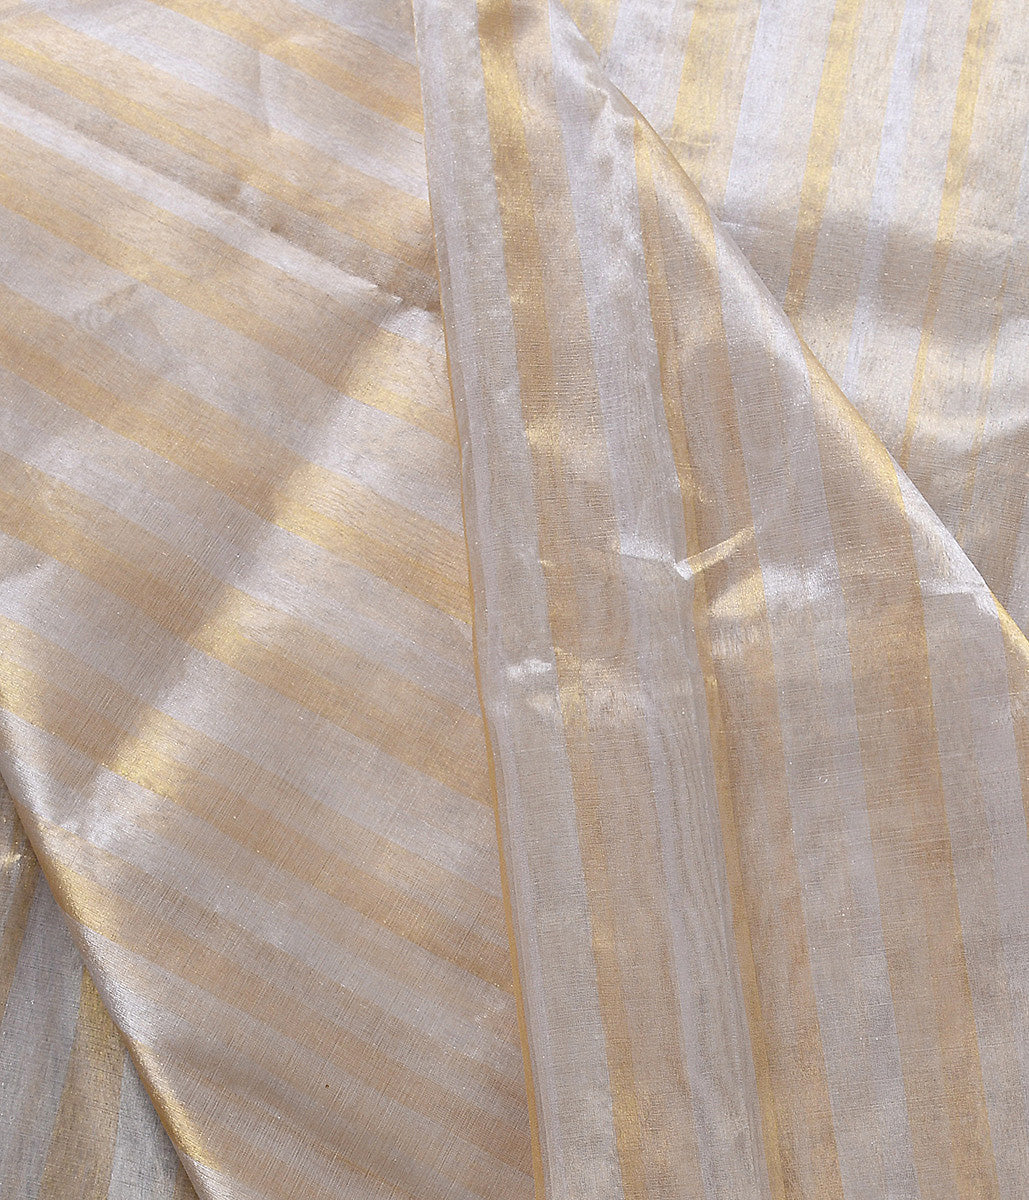 Handloom_Silver_and_Gold_Tissue_Fabric_Woven_in_Chanderi_WeaverStory_02